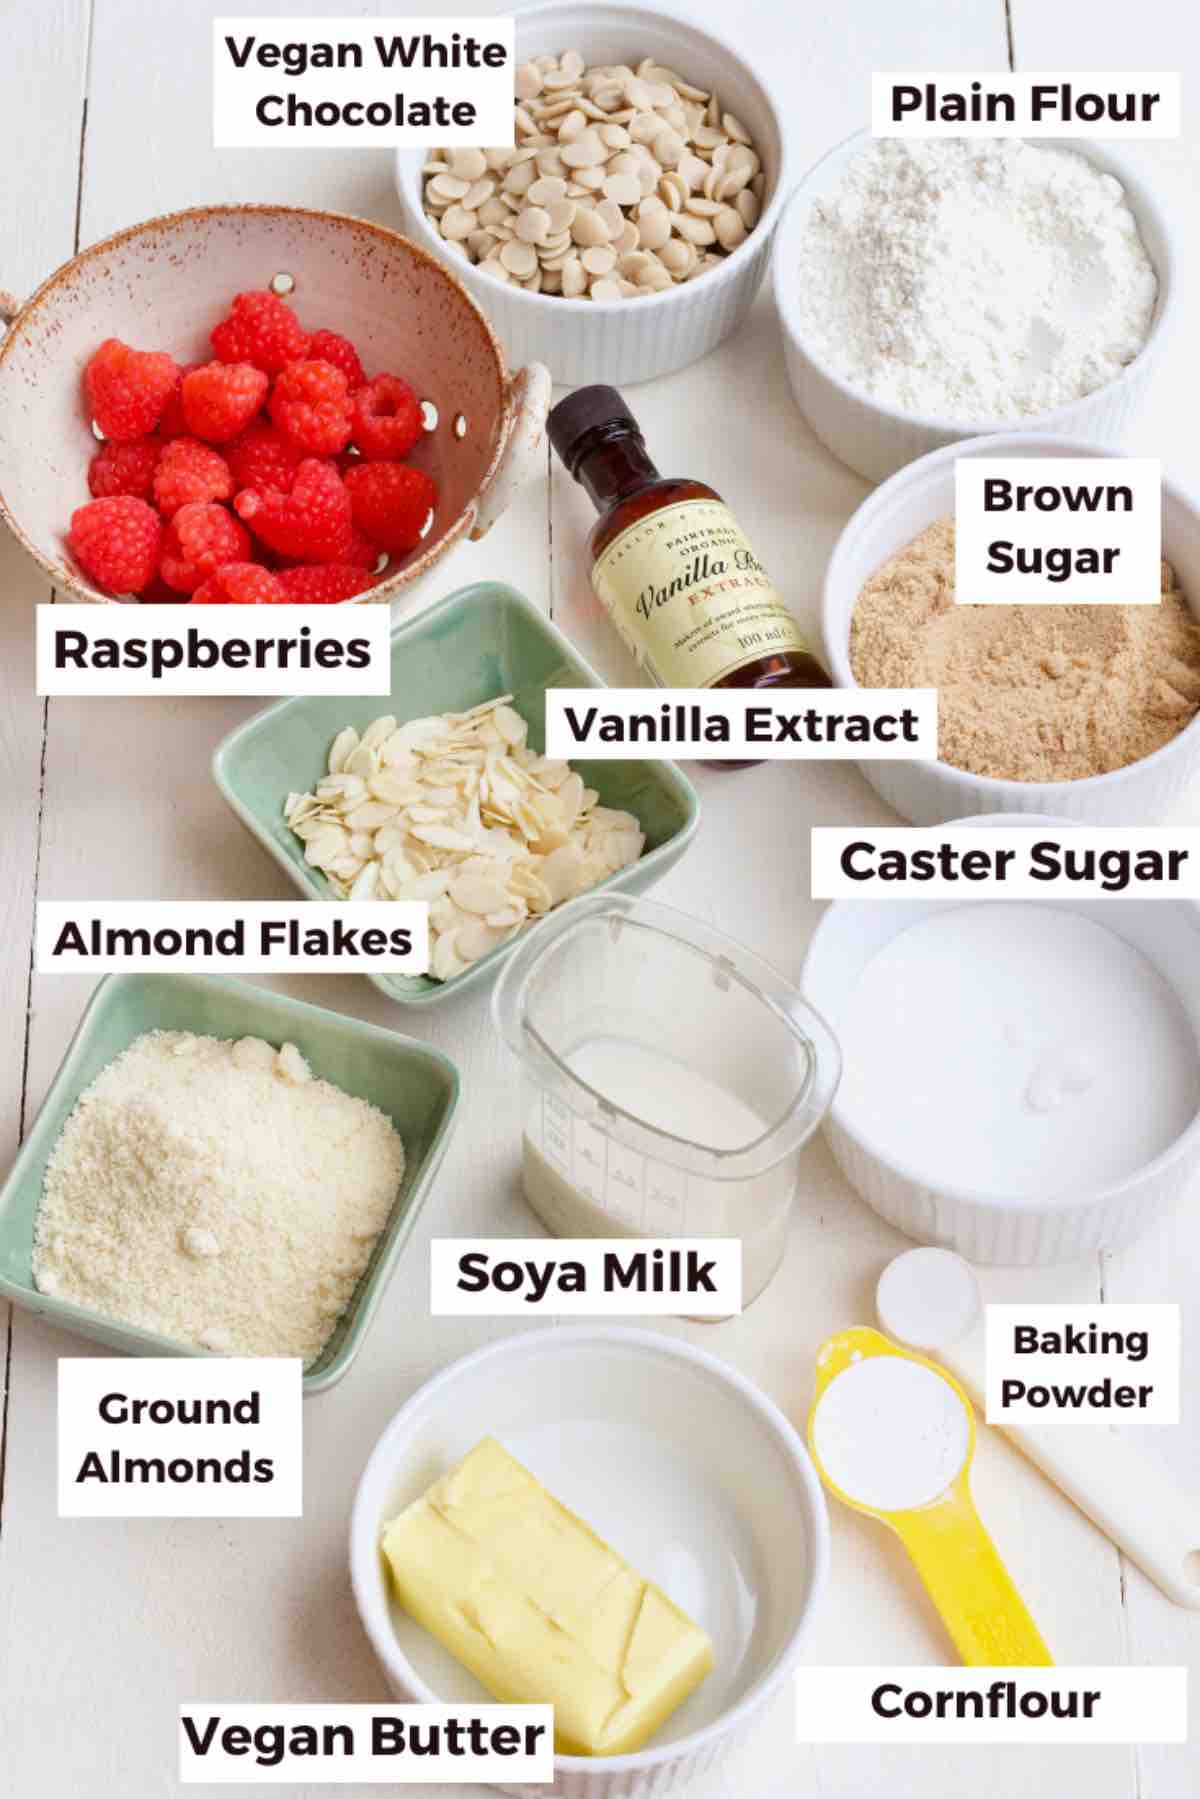 Ingredients for making white chocolate and raspberry blondies.